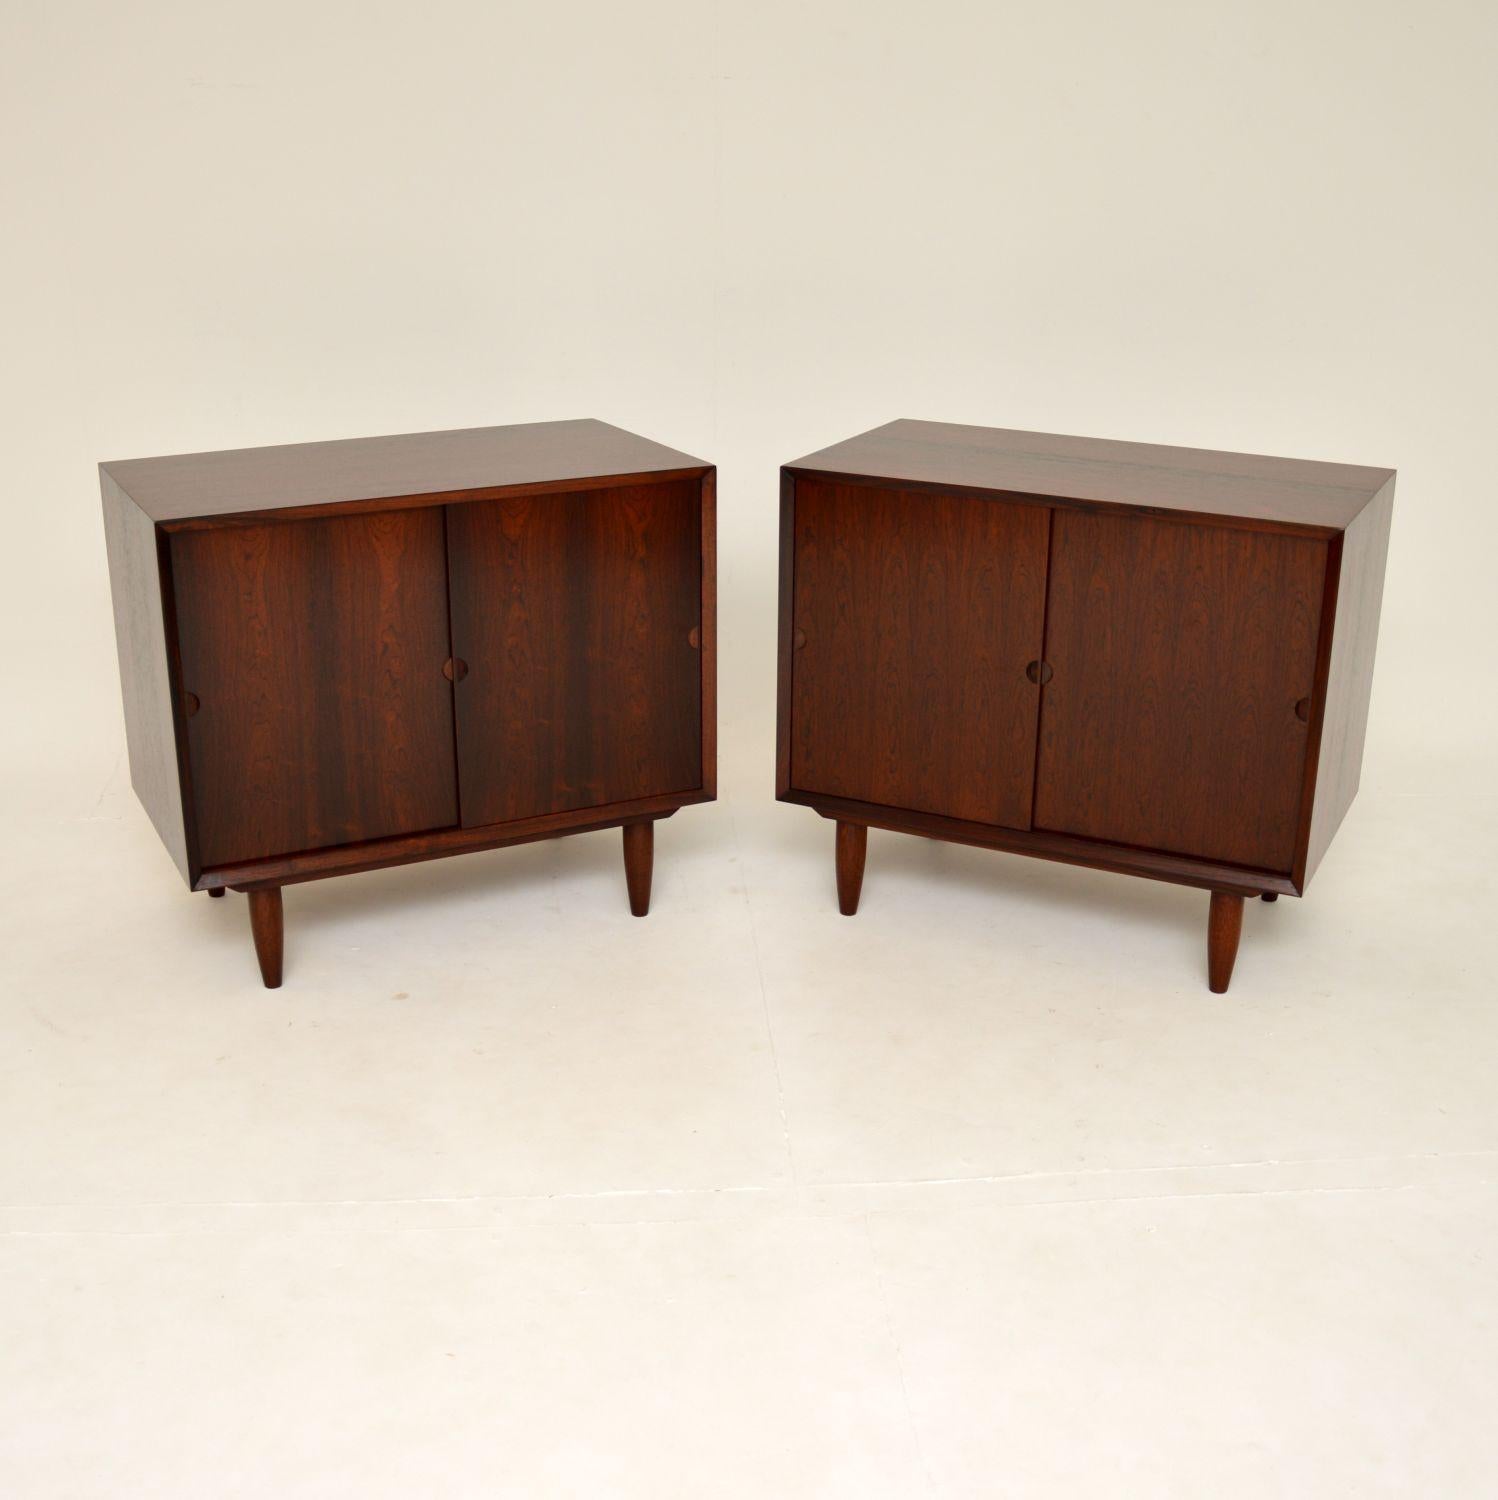 A stunning pair of vintage Danish cabinets. These were made in Denmark in the 1960’s, they were designed by Poul Cadovius.

They are of absolutely amazing quality, with a gorgeous colour tone and beautiful grain patterns throughout. Even the